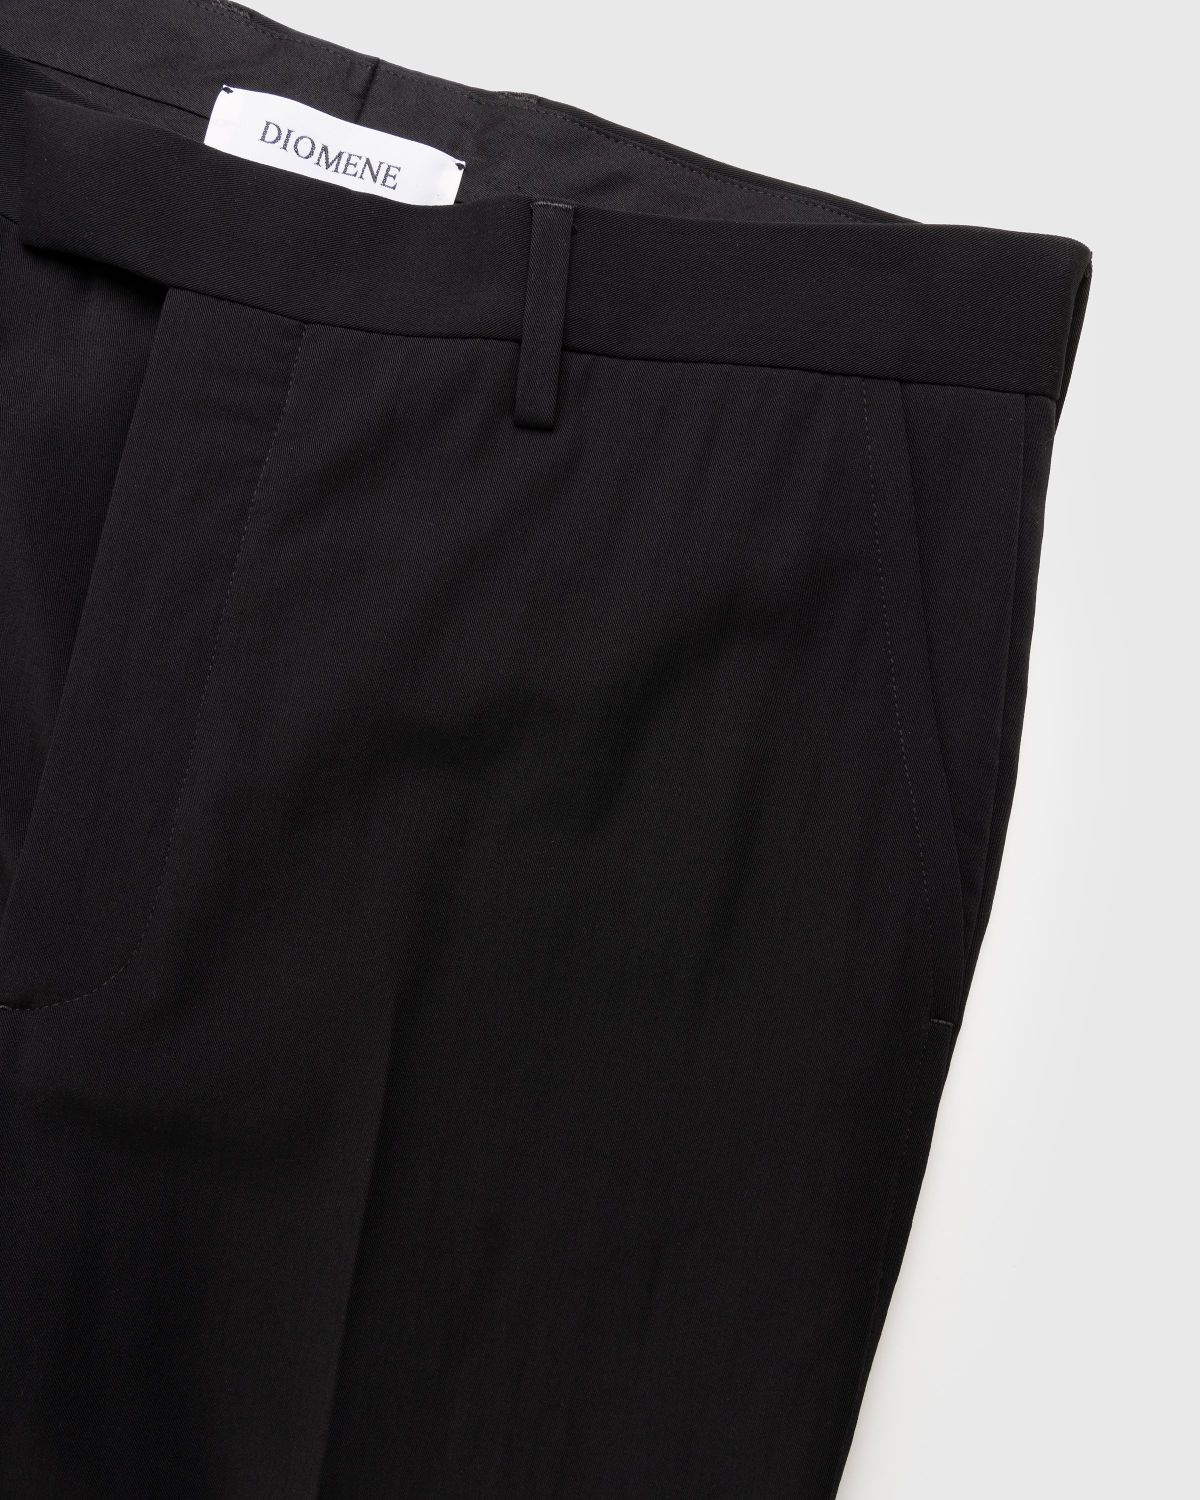 Diomene by Damir Doma – Classic pants Meteorite - Trousers - Black - Image 4